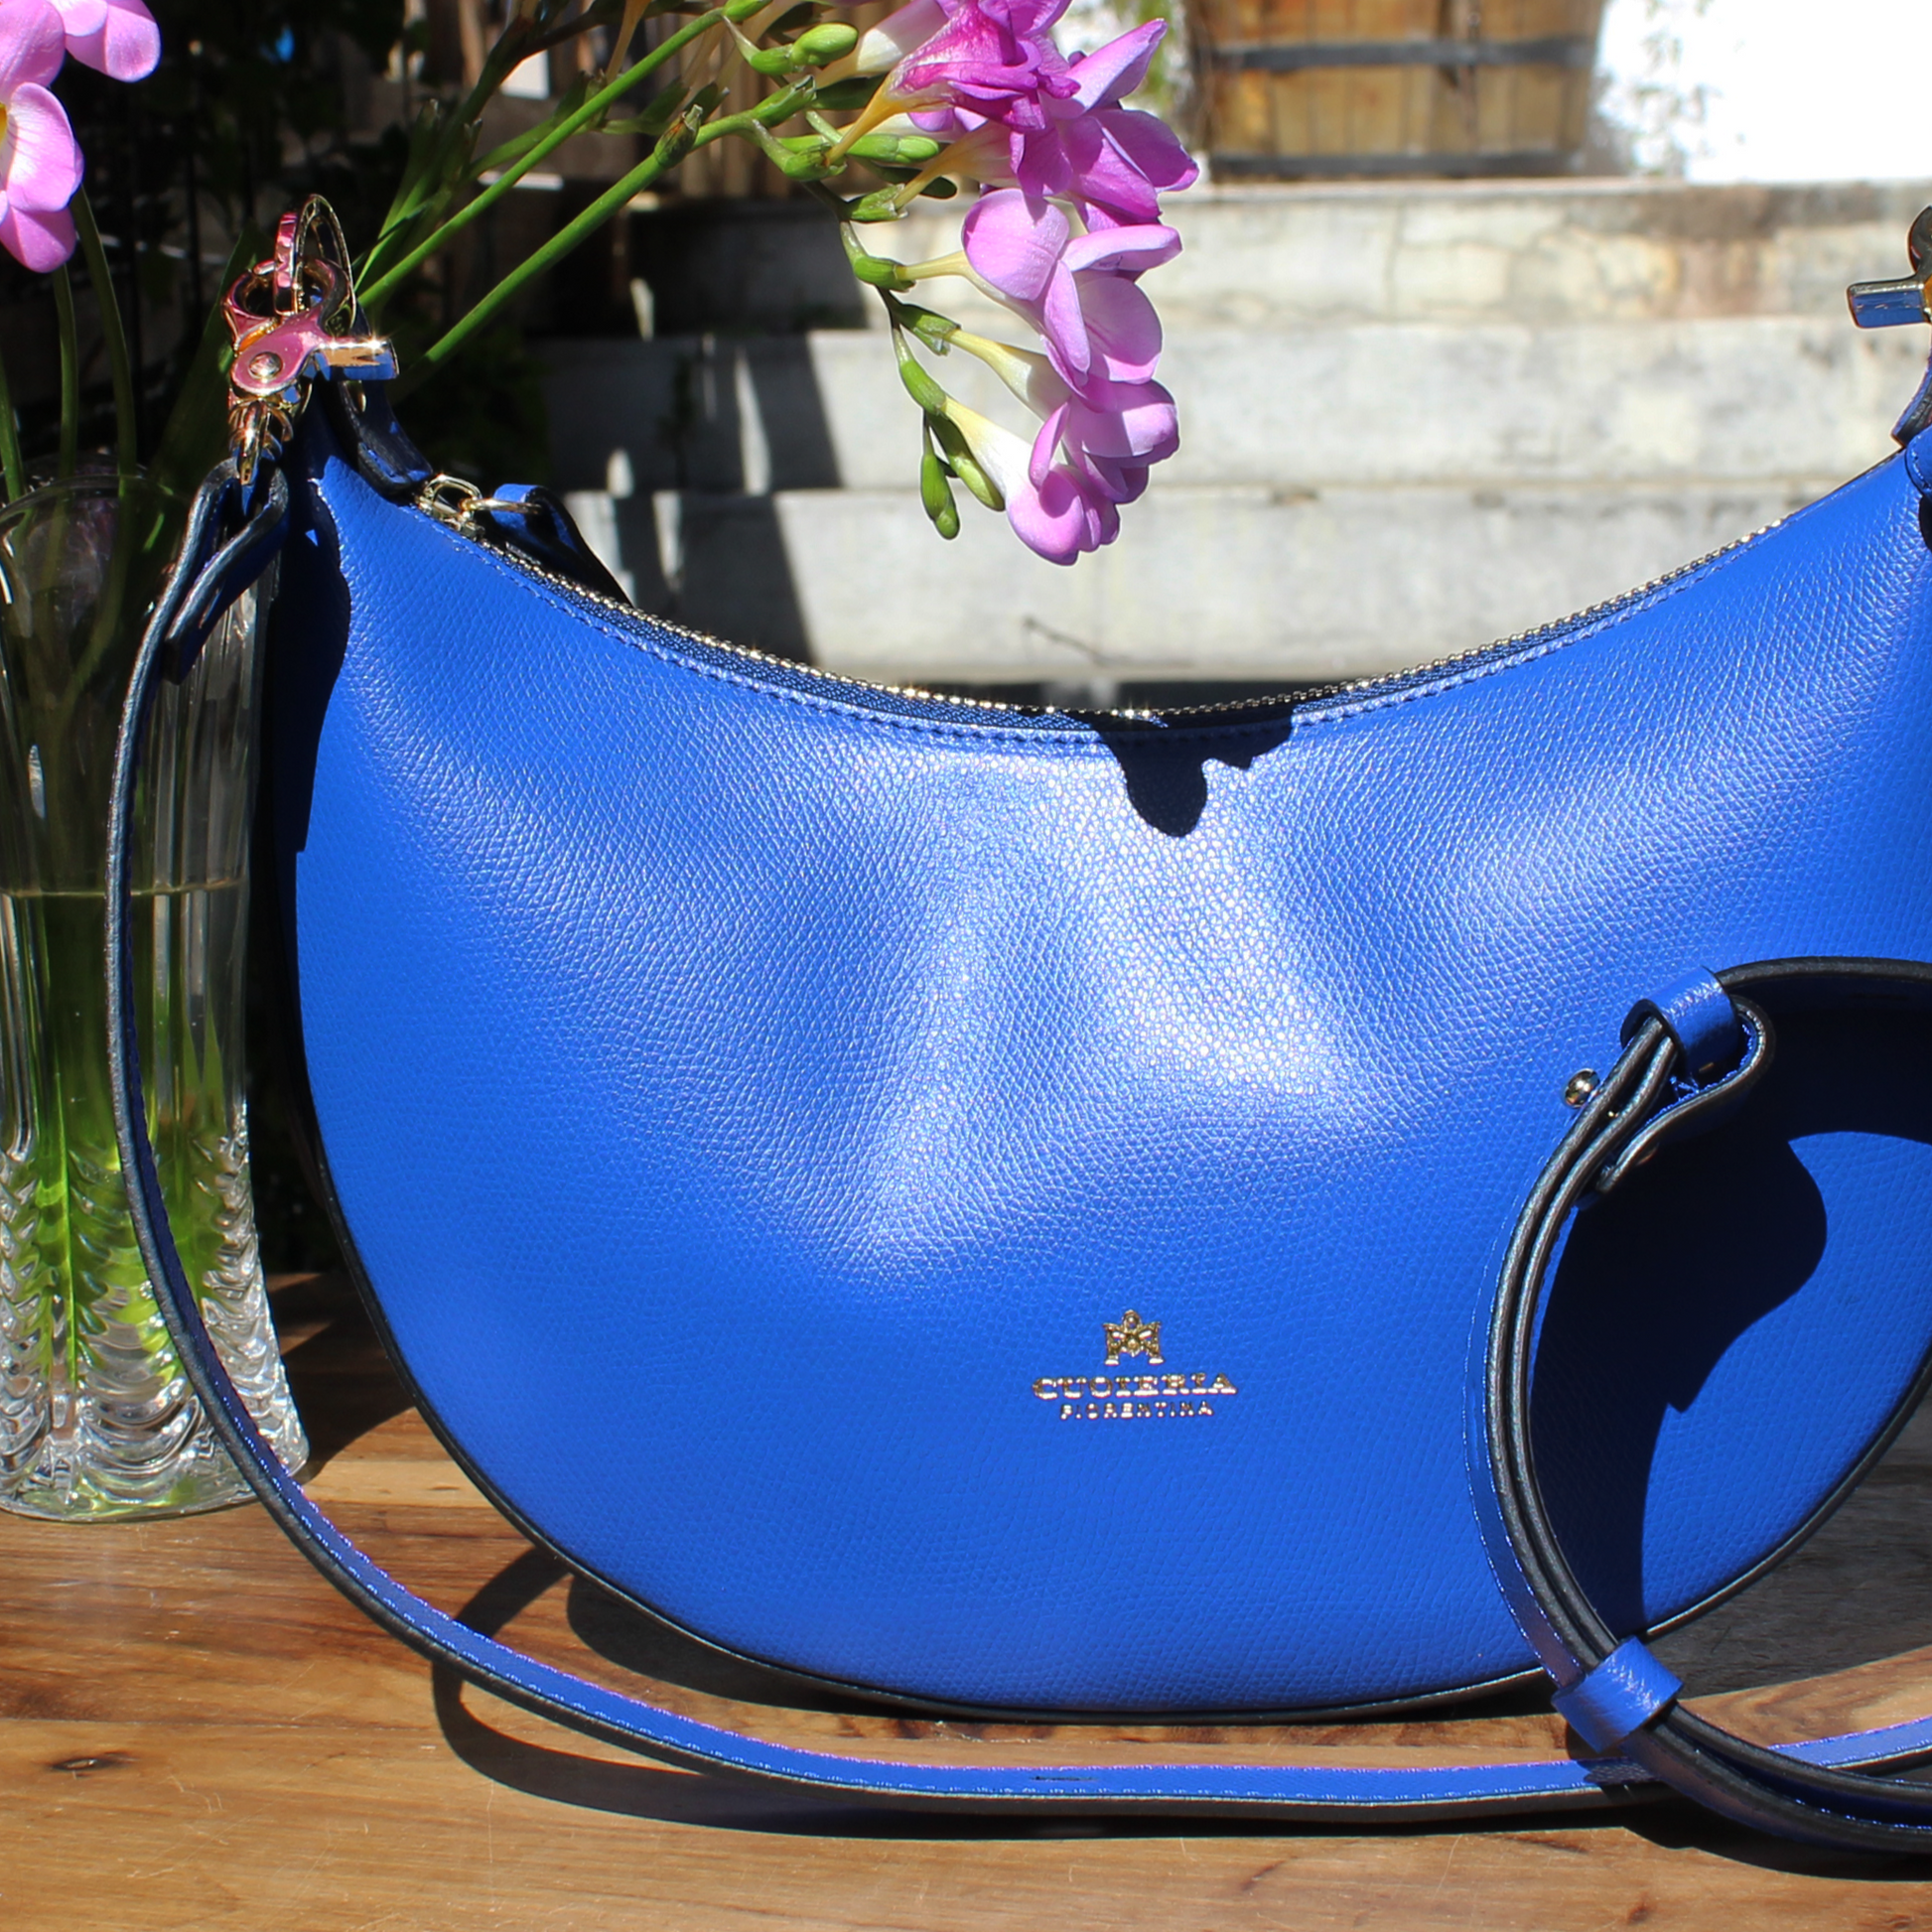 Shop Womens Italian-made Leather Eva Small Hobo Handbag in Blu (5825420) or browse our range of hand-made Italian handbags for women in-store at Aliverti Cape Town, or shop online.   We deliver in South Africa & offer multiple payment plans as well as accept multiple safe & secure payment methods.